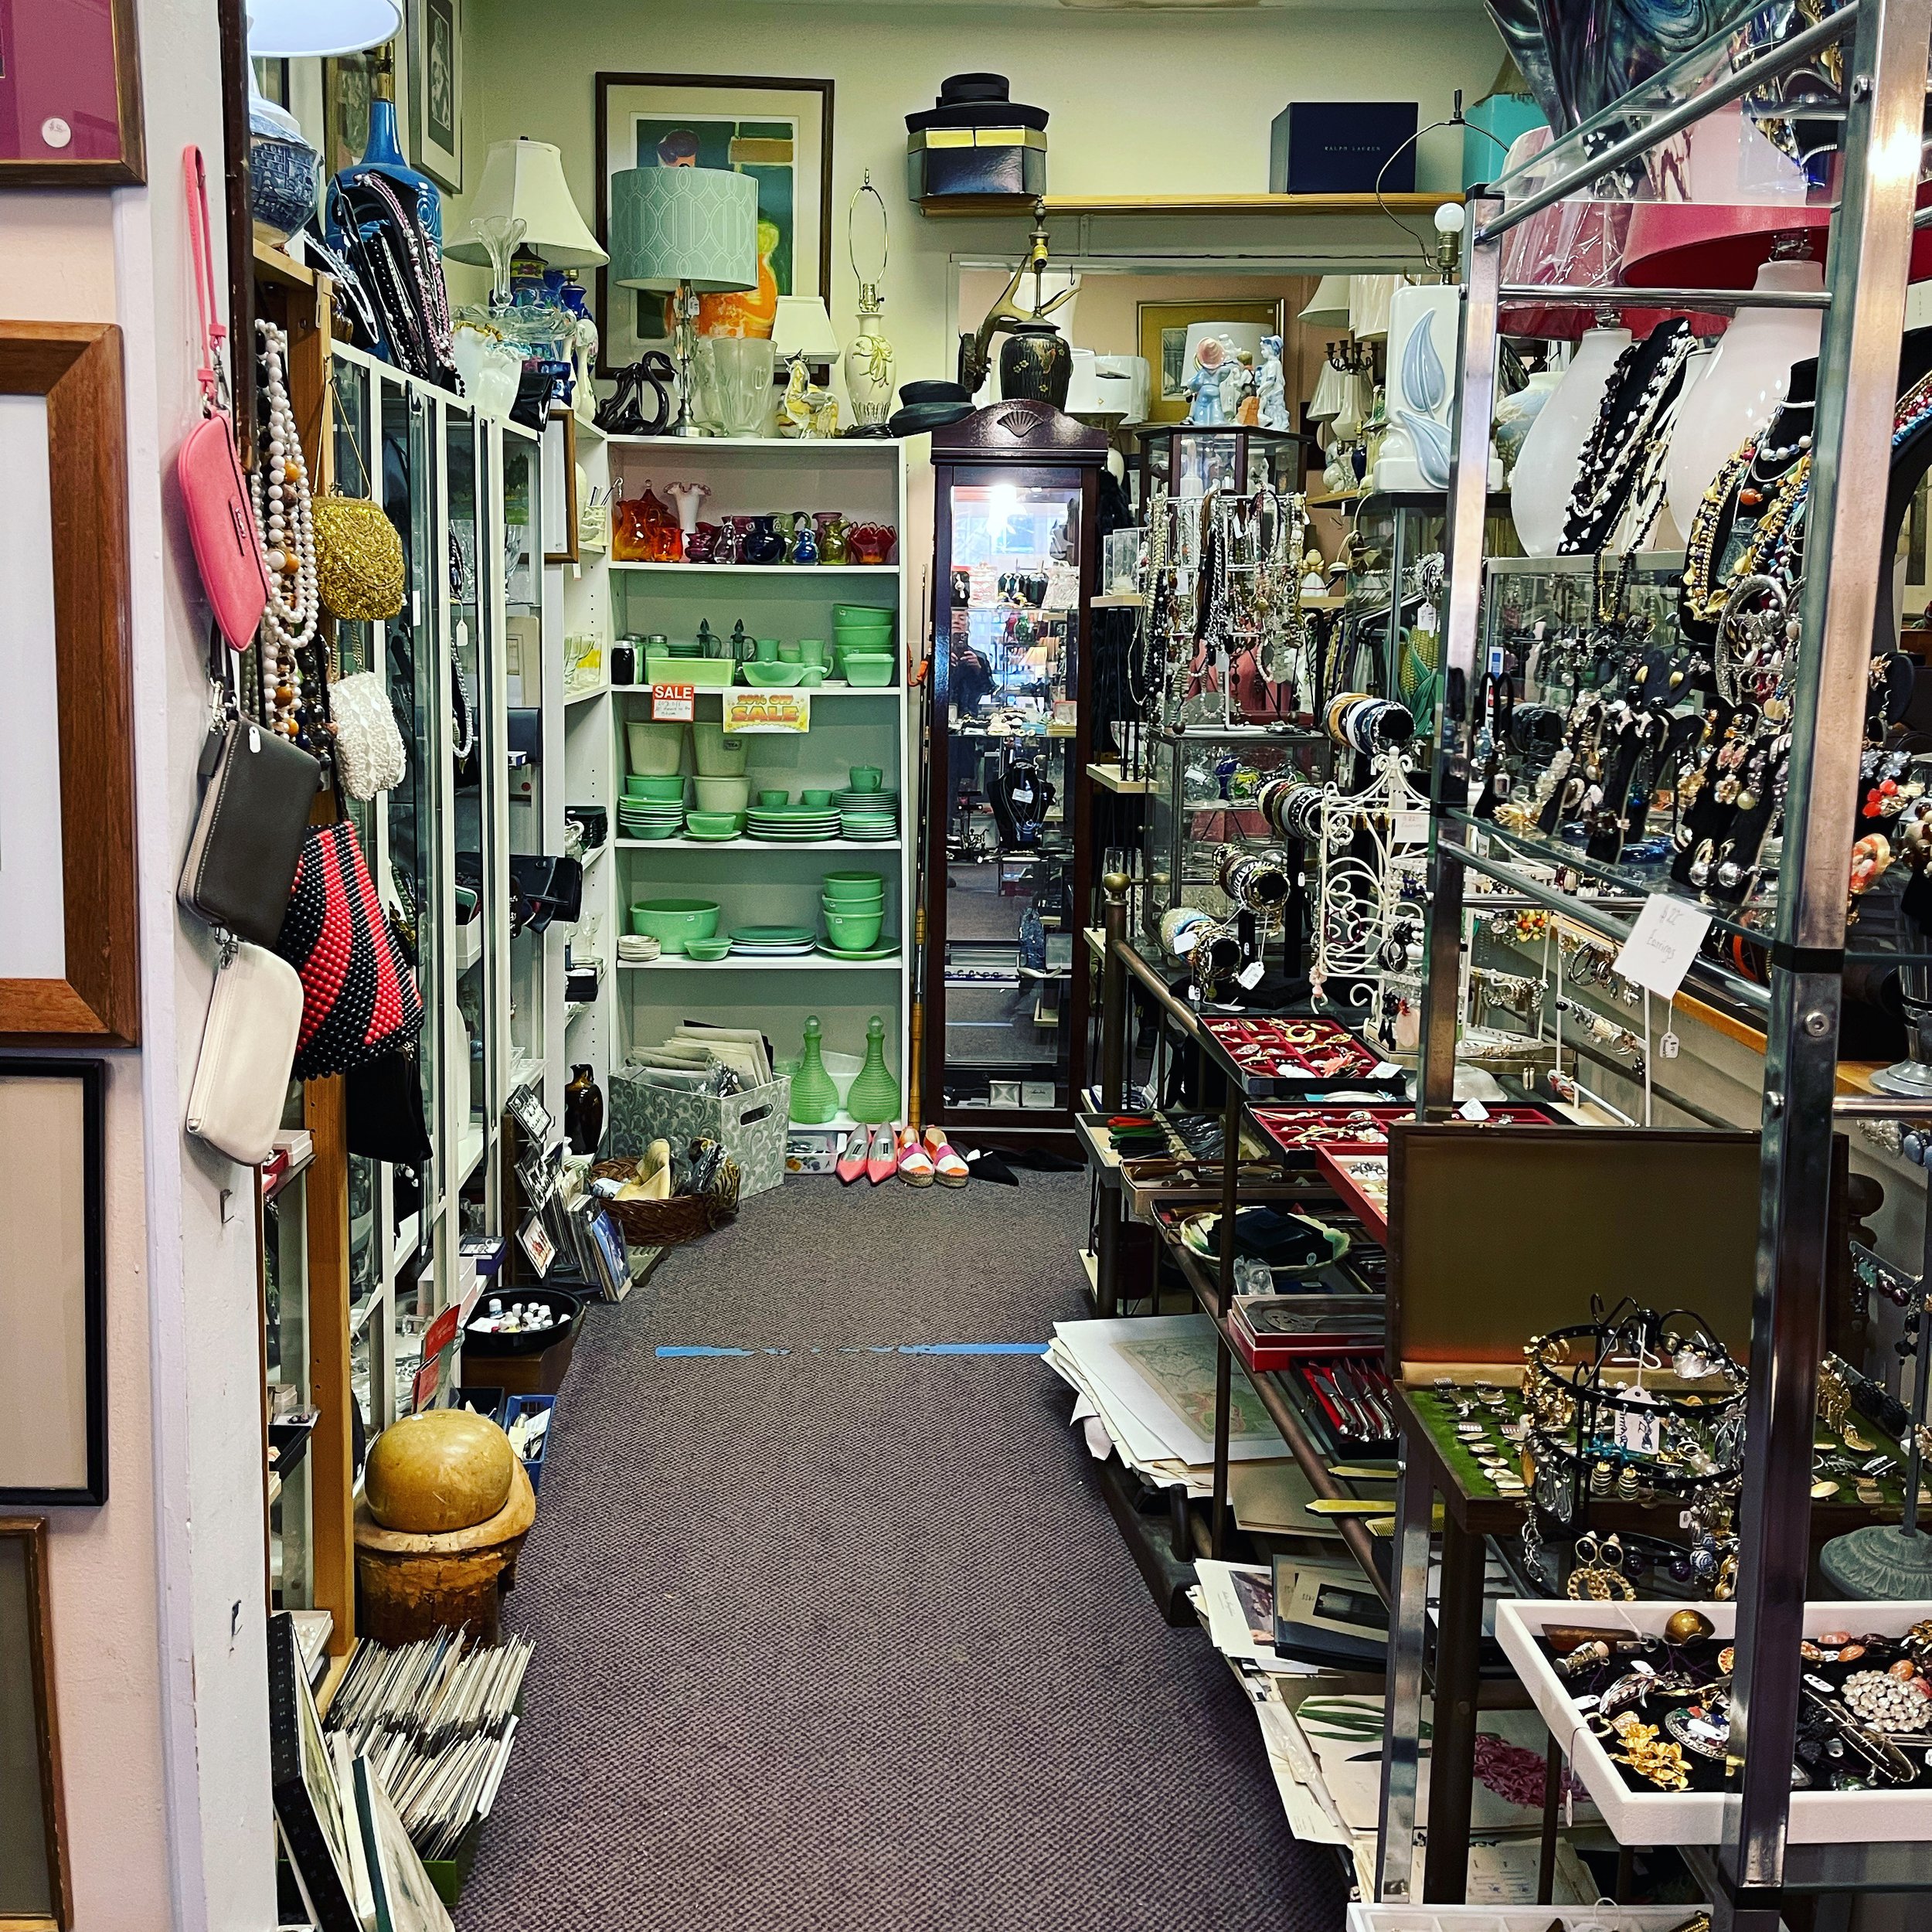 How Do Pawn Shops Determine Value? - An Insider's Guide